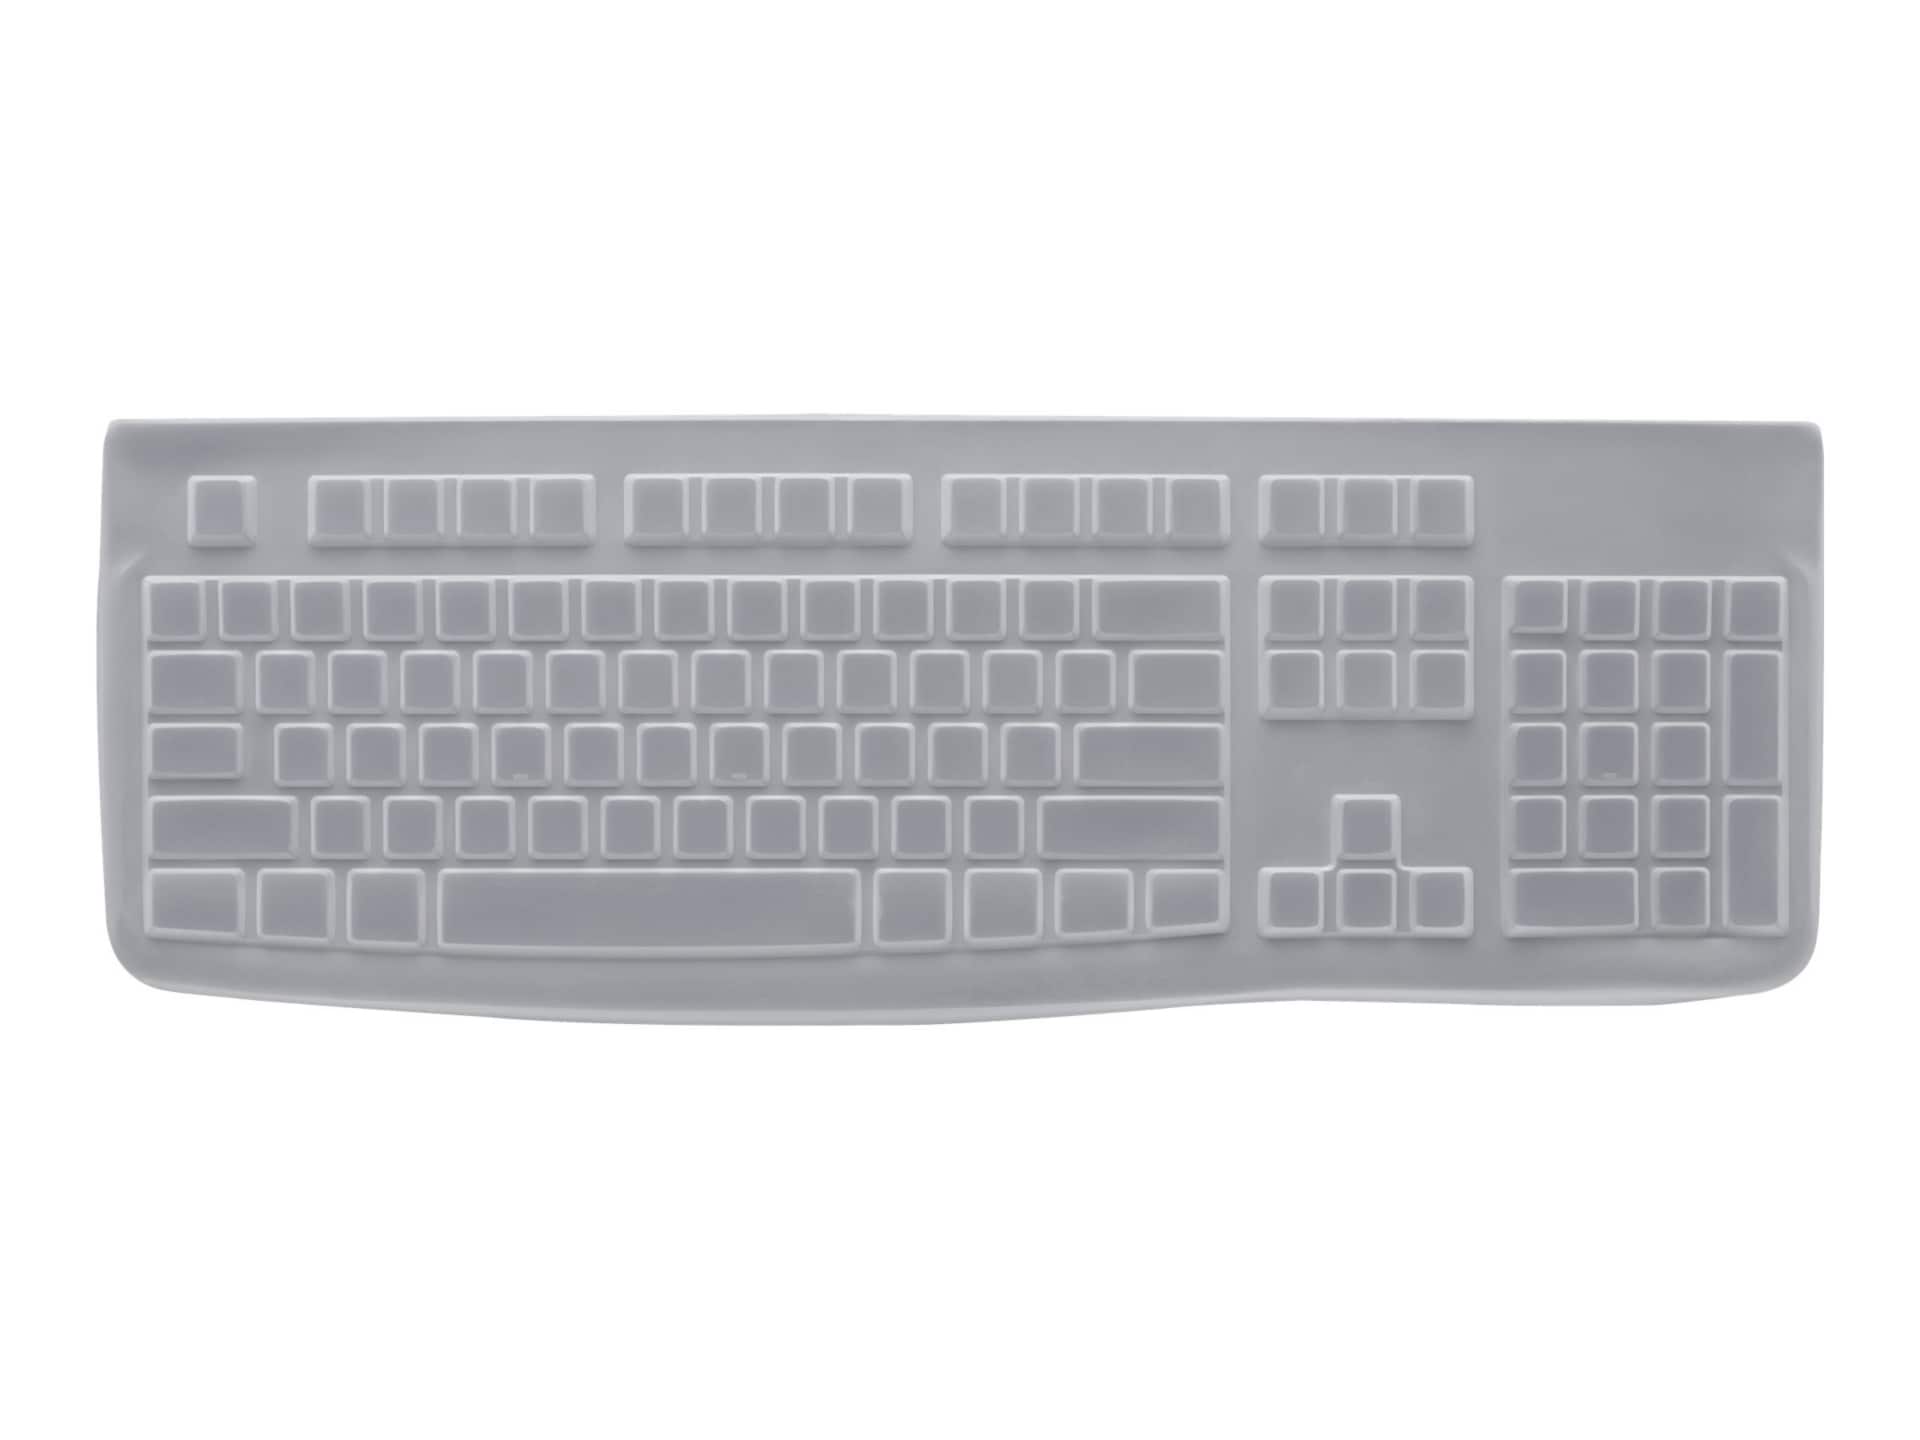 Logitech Protective Cover for K120 Keyboard for Education - keyboard cover